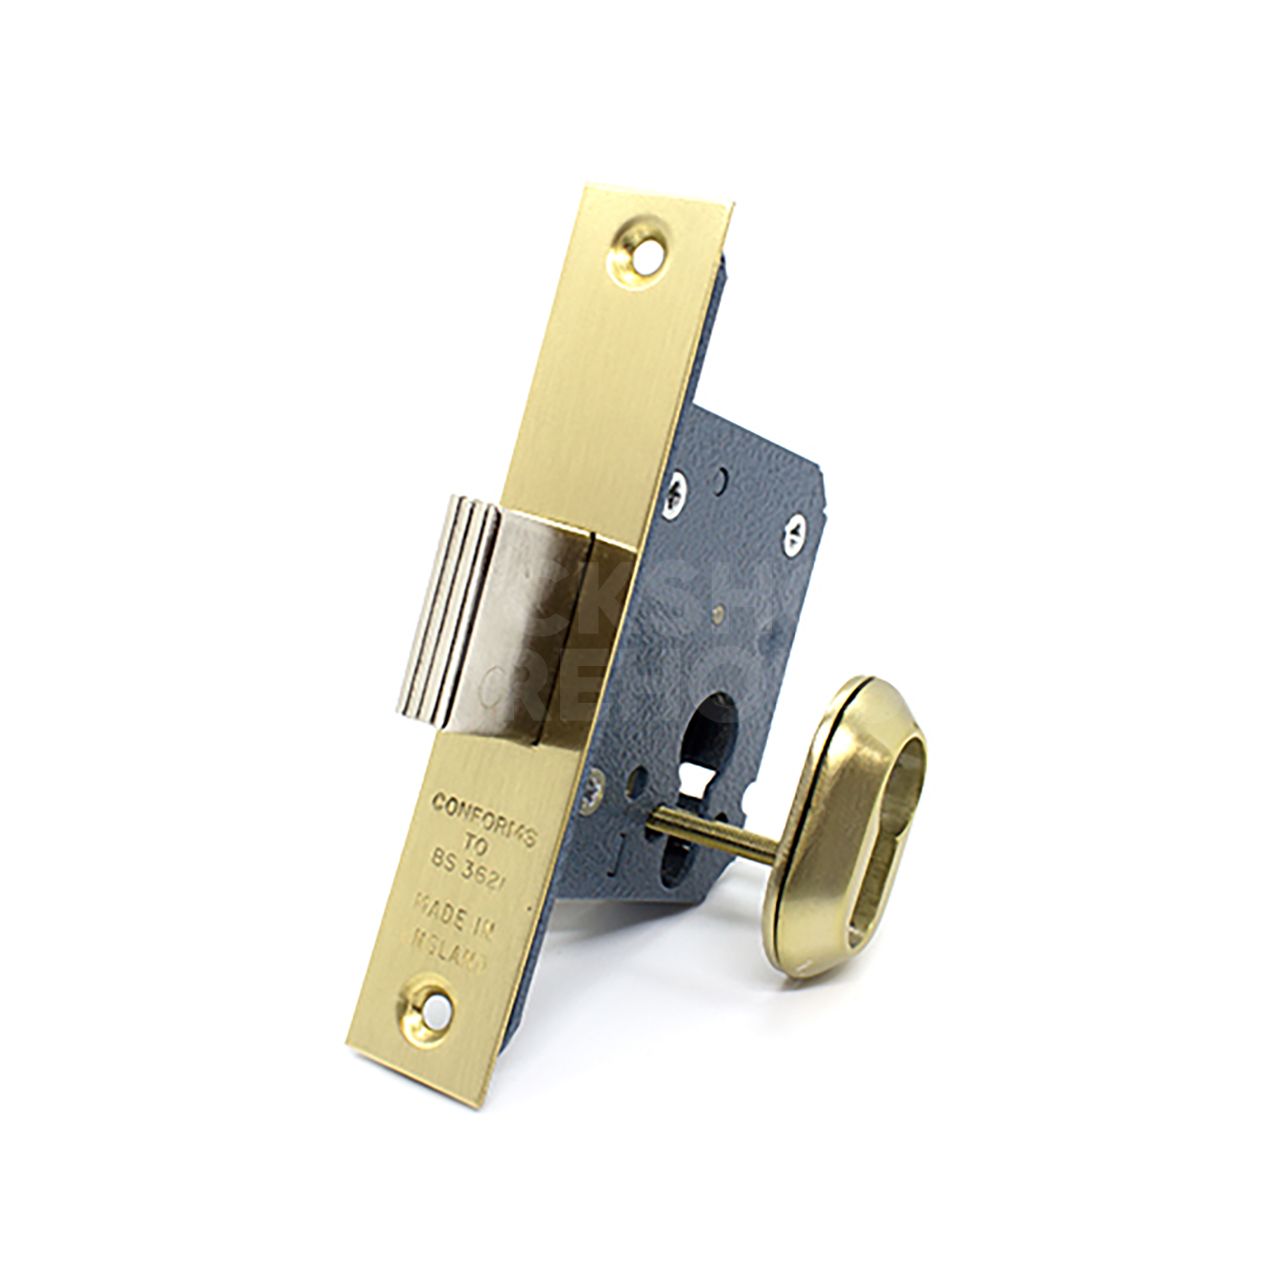 IMPERIAL G7134 BS3621 EURO-PROFILE DEADLOCK WITH SECURITY ESCUTCHEONS